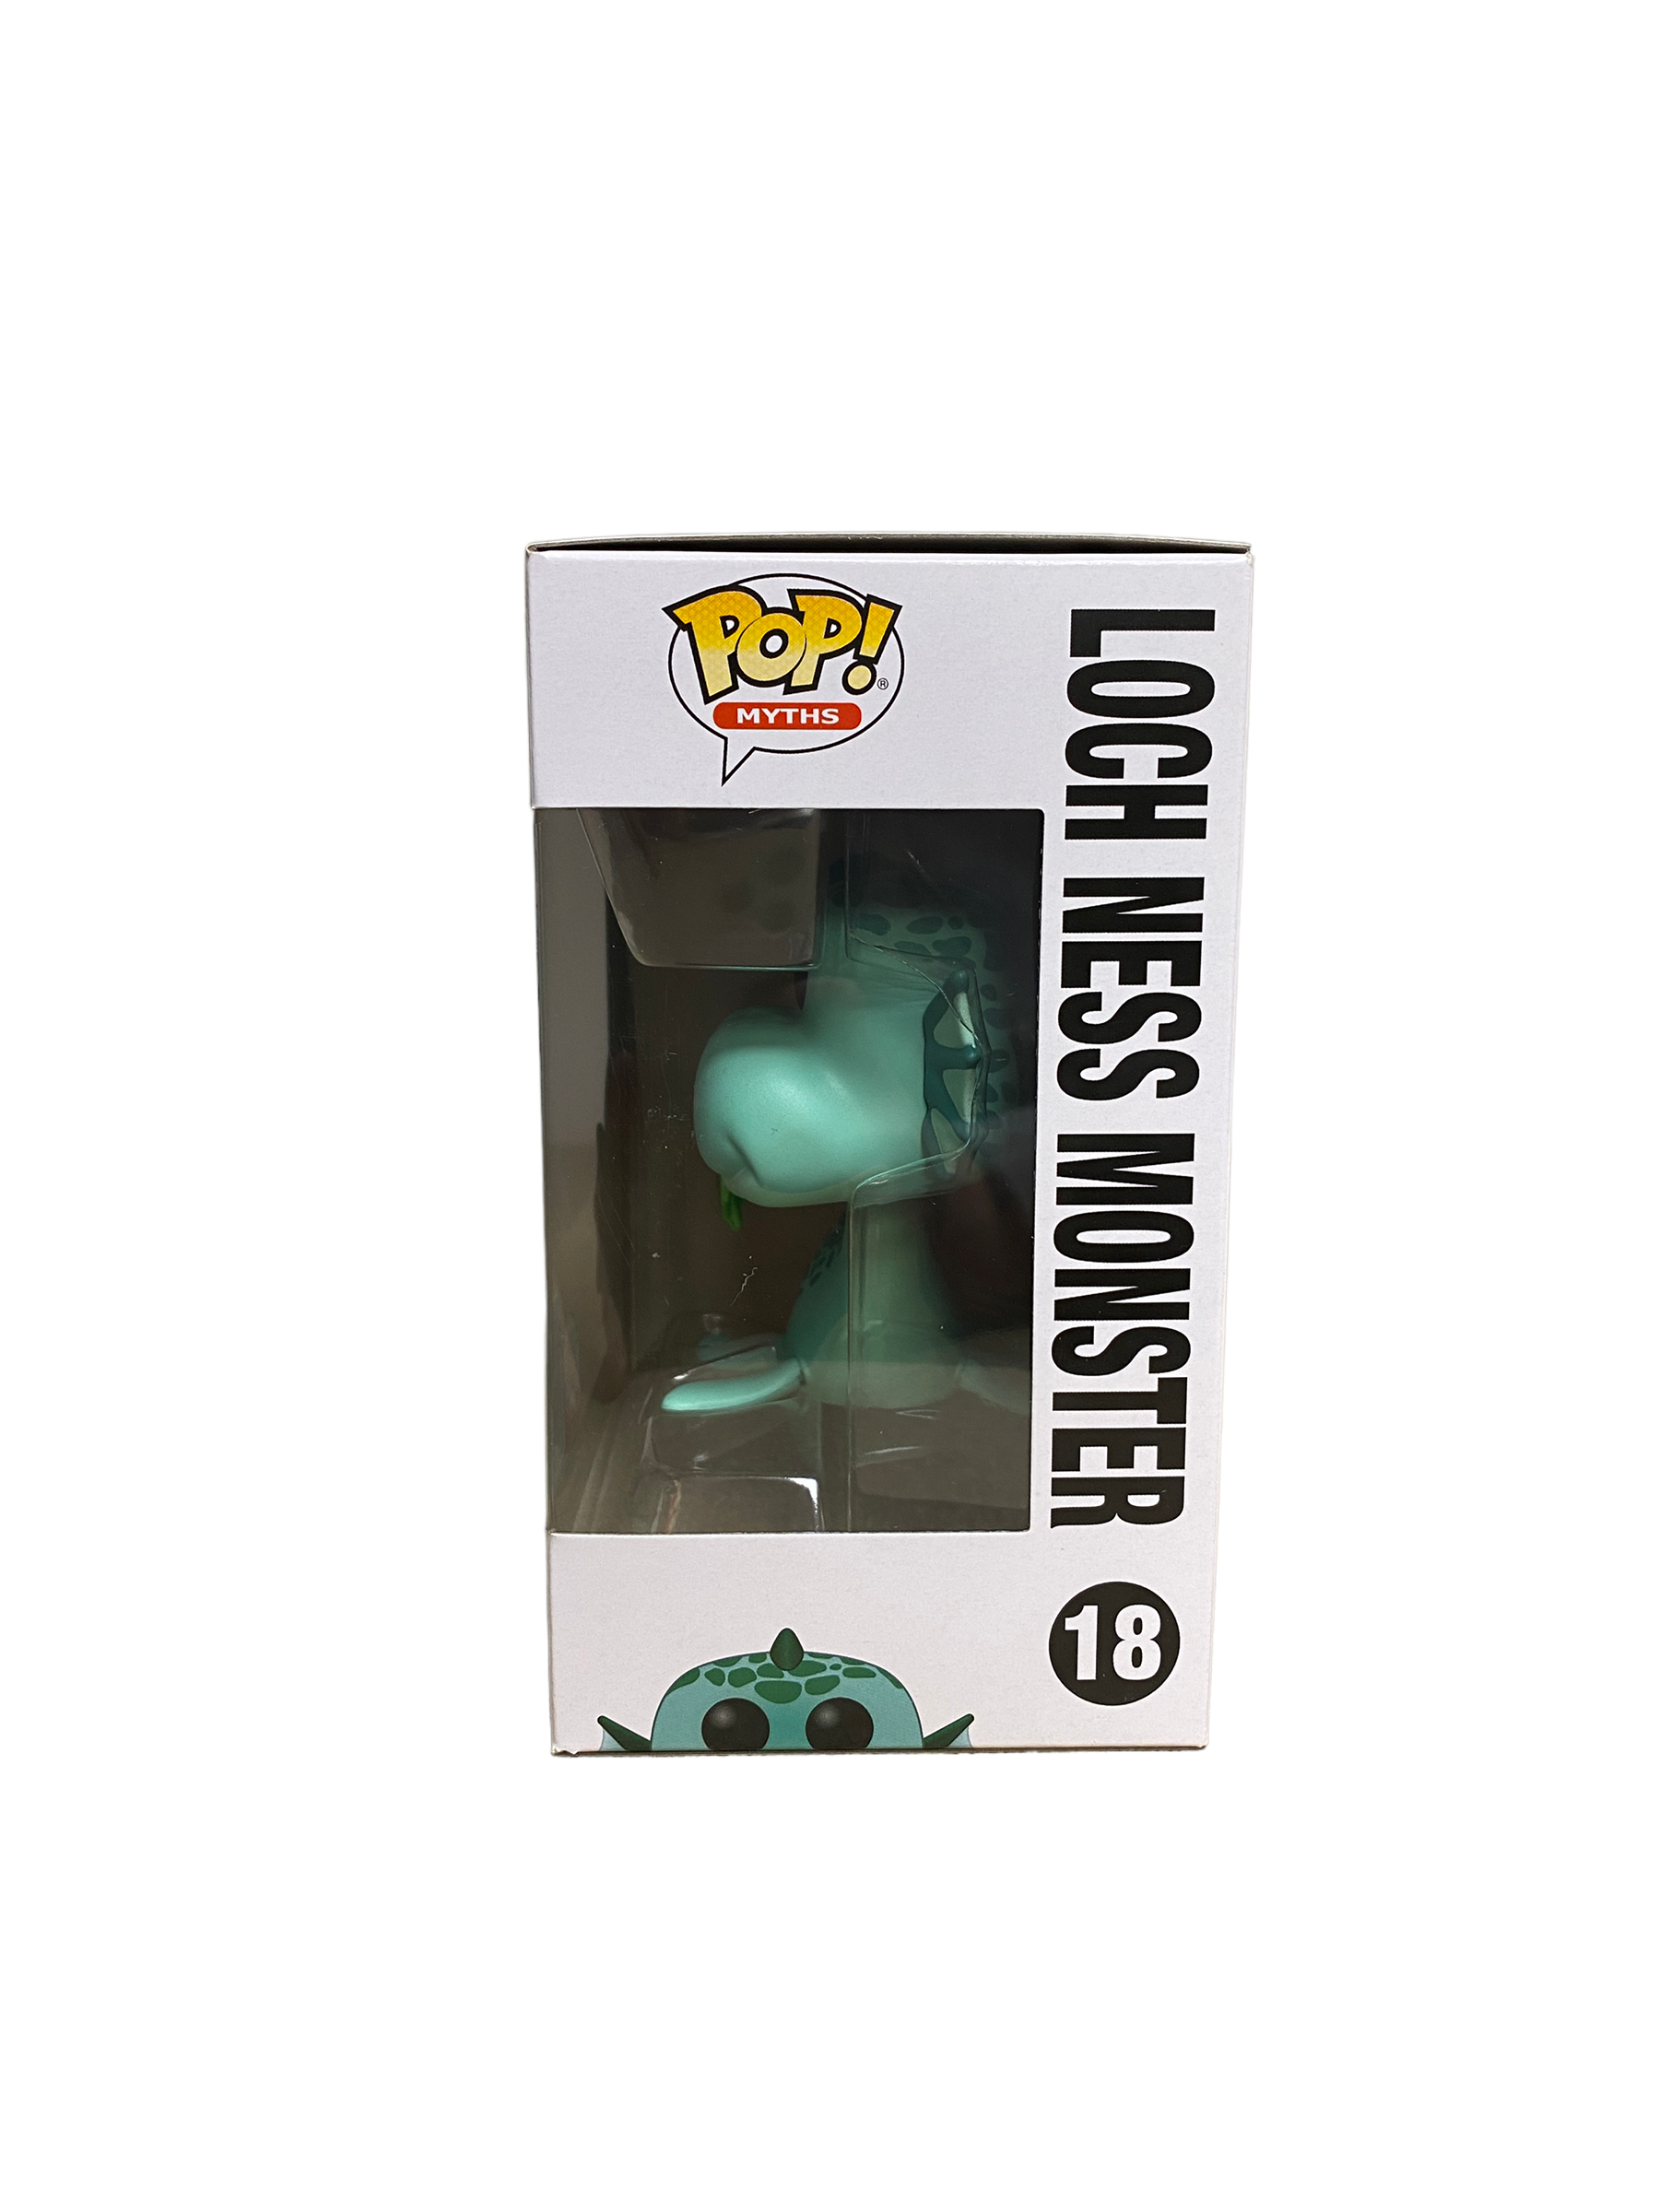 Loch Ness Monster #18 (Glows in the Dark) Funko Pop! - Myths - ECCC 2020 Shared Exclusive LE1500 Pcs - Condition 9/10